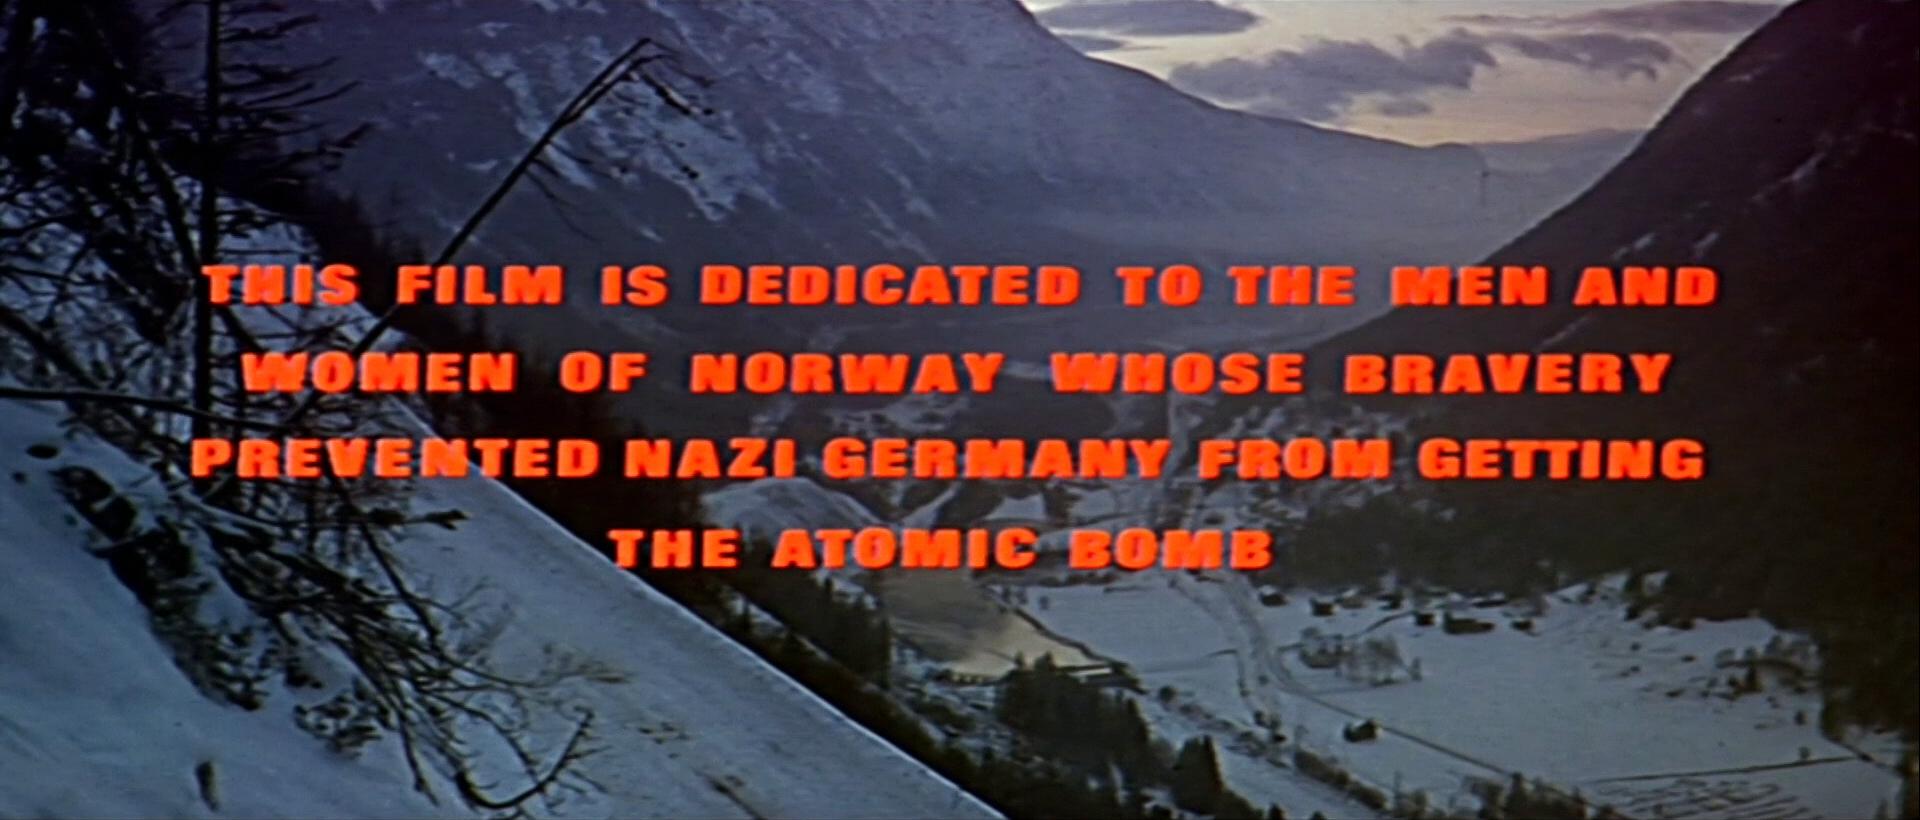 Screenshot from The Heroes of Telemark (1965) (2). This film is dedicated to the men and women of Norway whose bravery prevented Nazi Germany from getting the atomic bomb